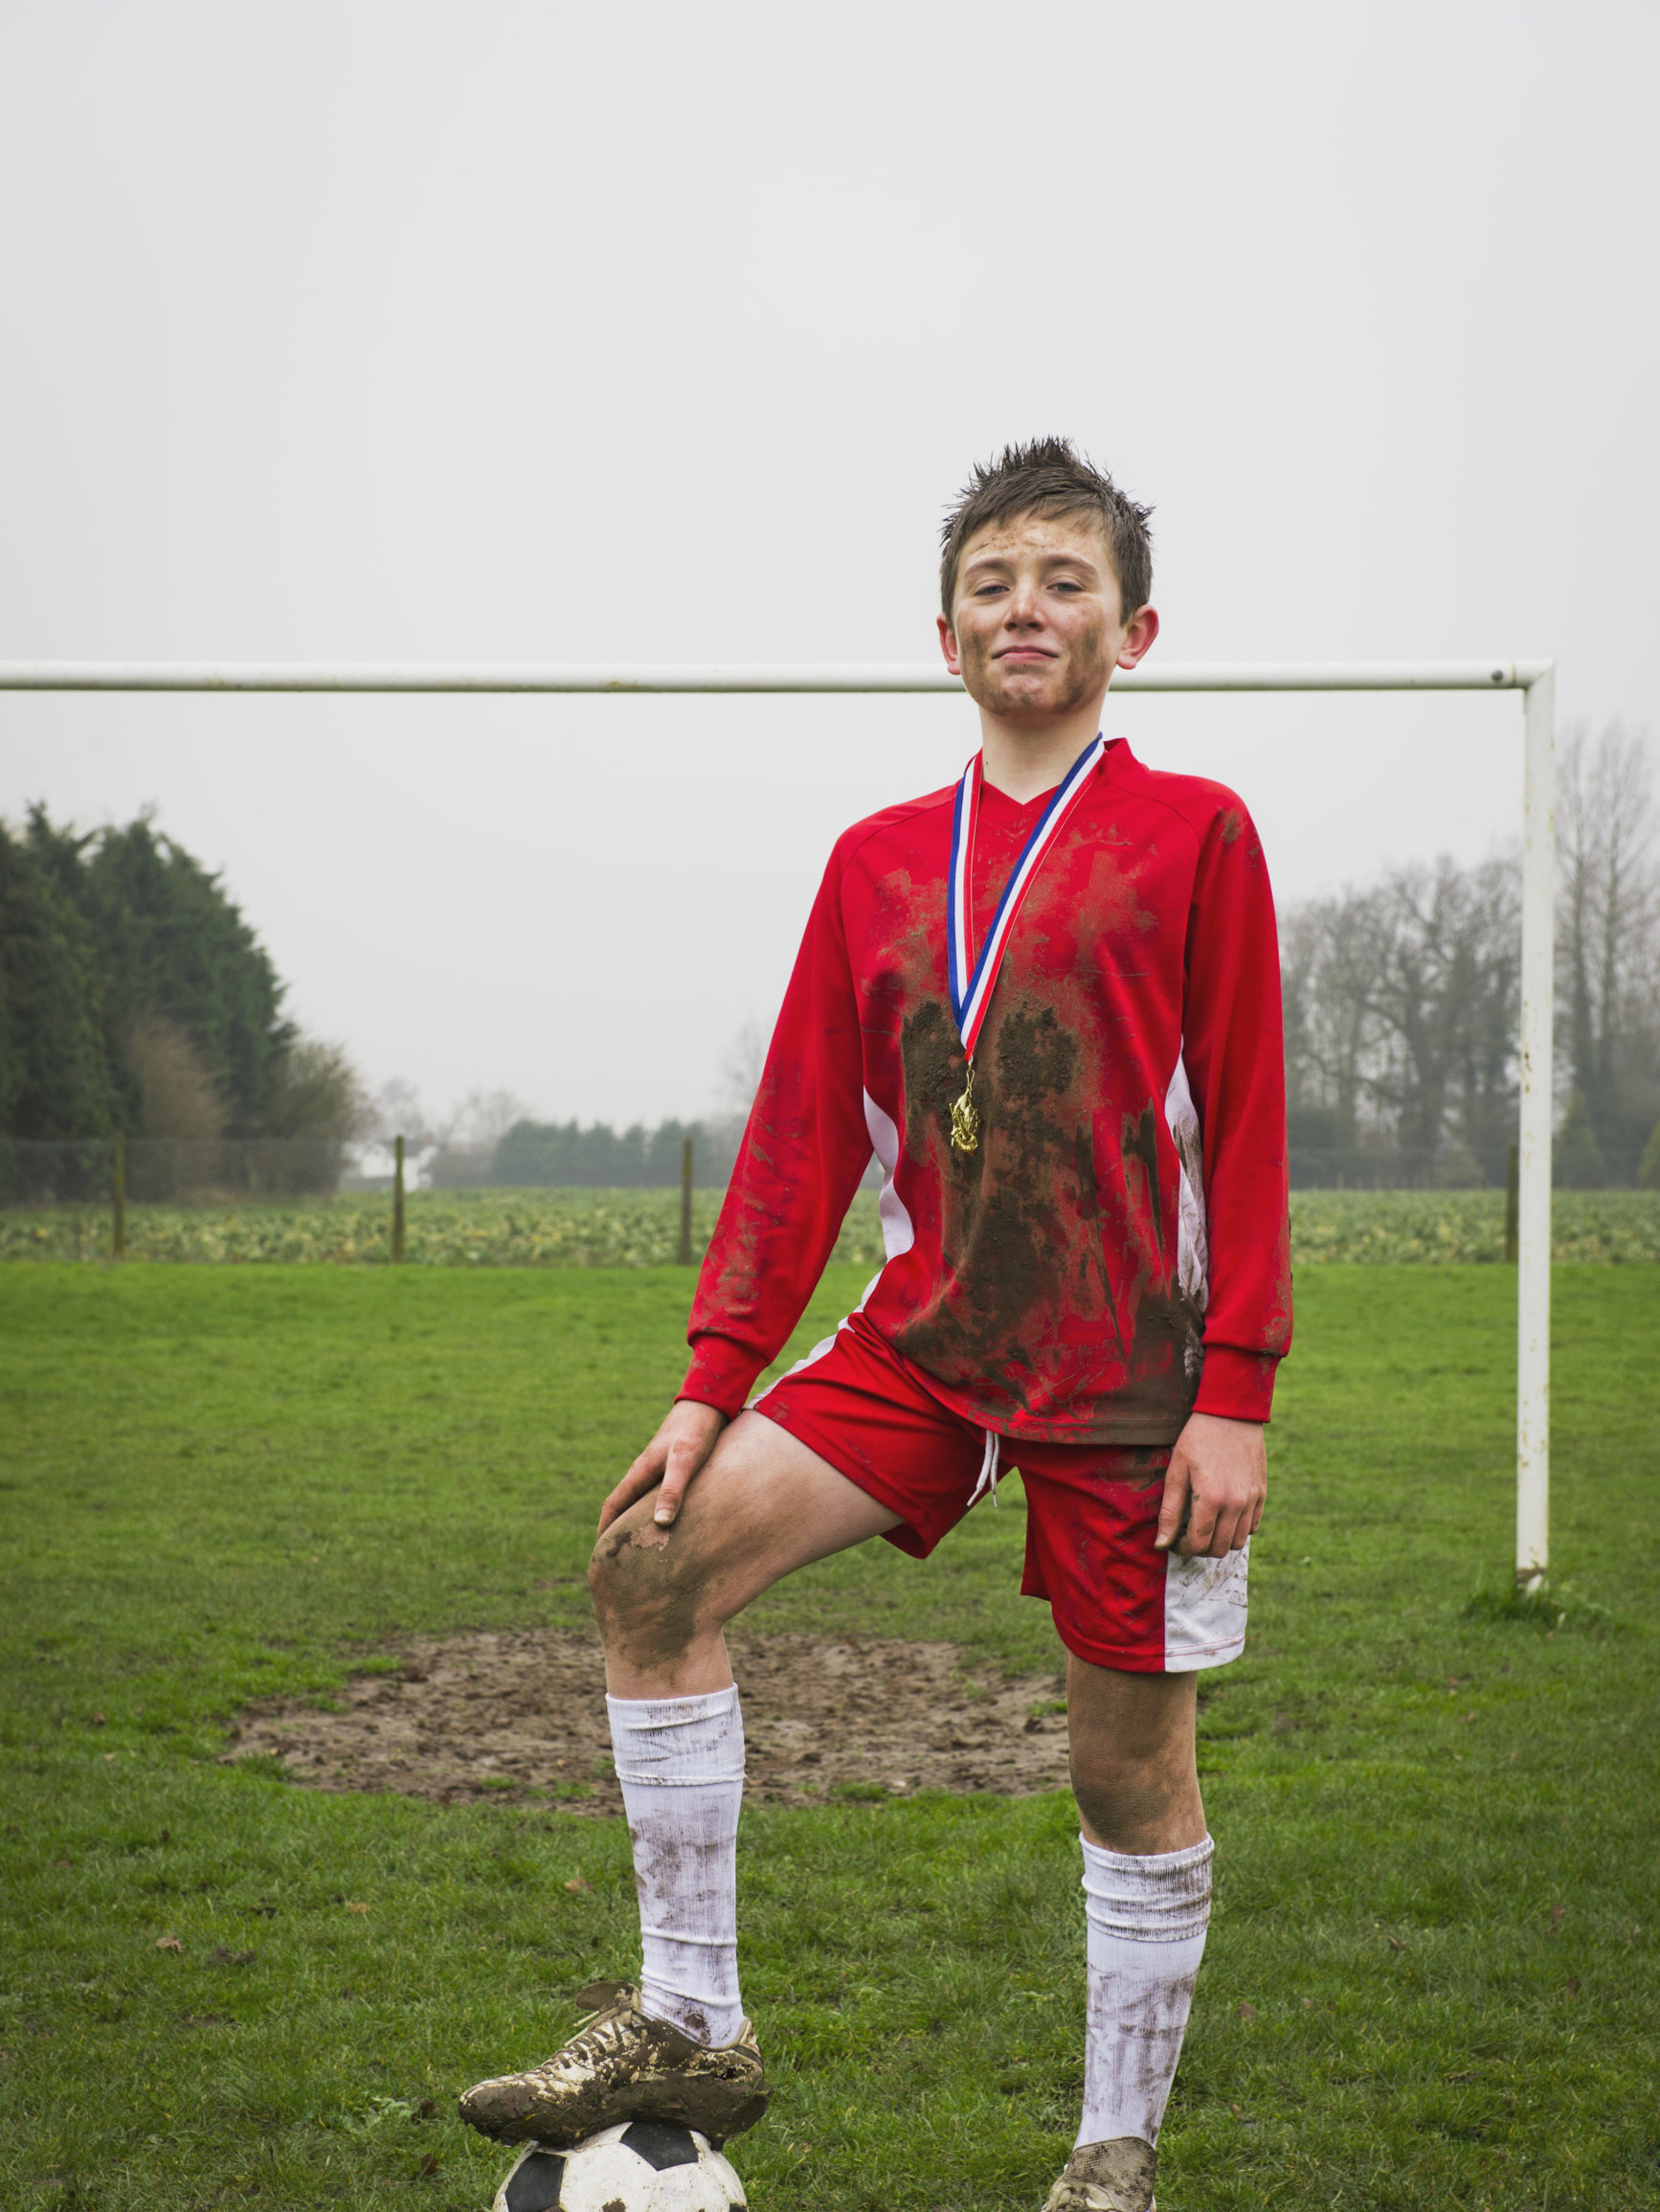 Young teen boy in soccer uniform covered in dirt with a medal